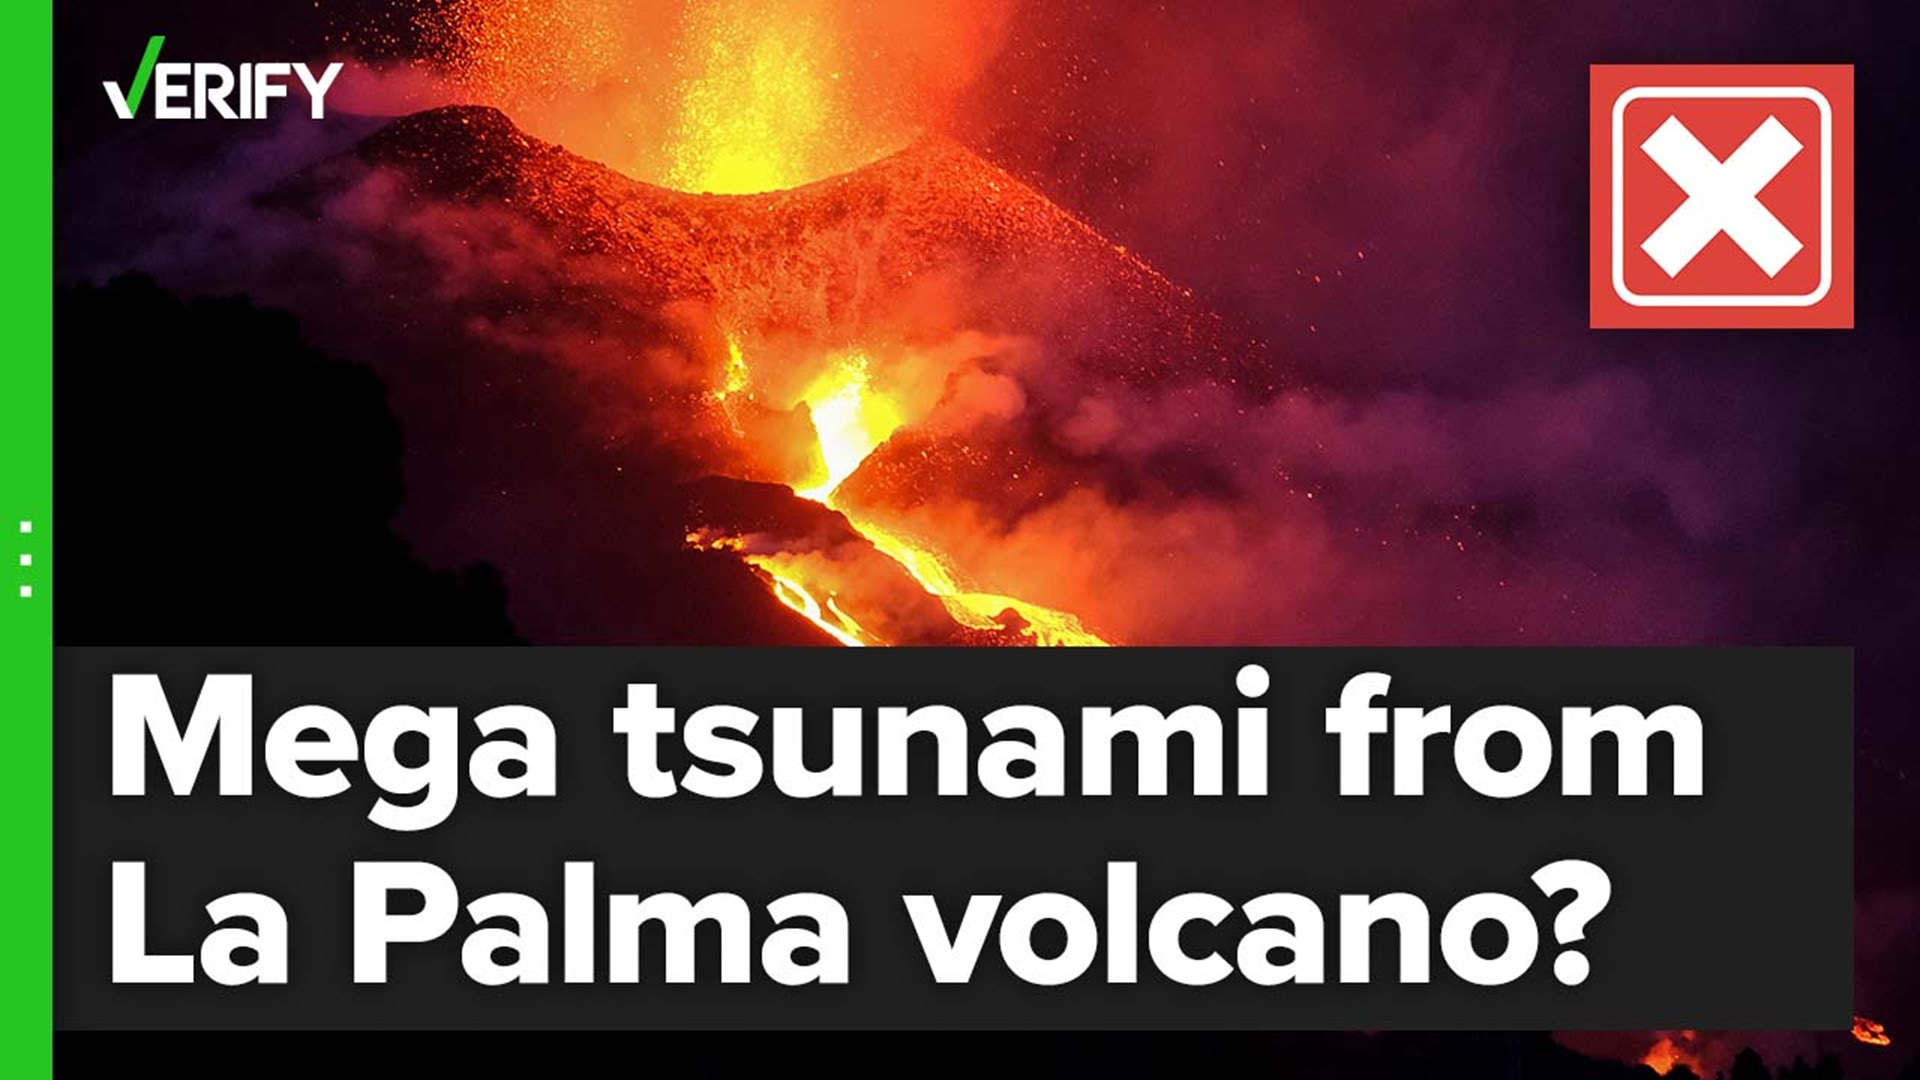 The volcano on La Palma in the Canary Islands will not cause a ‘mega tsunami’ as conspiracy theorists suggest